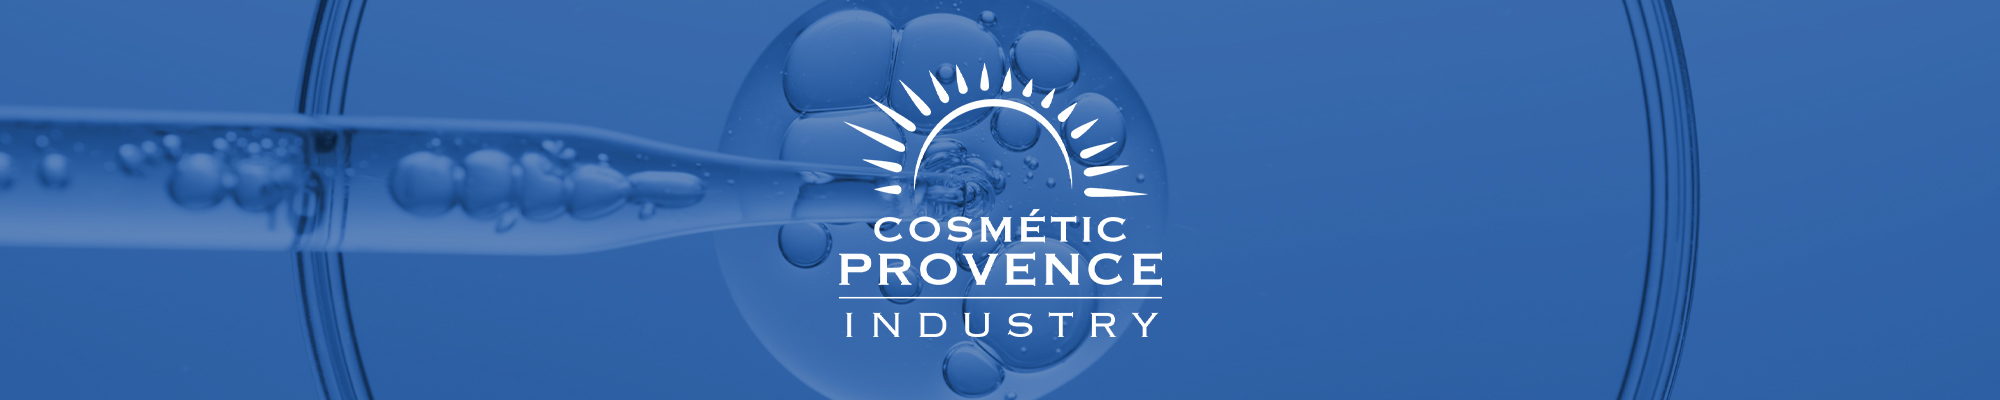 Cosmétic Provence Industry